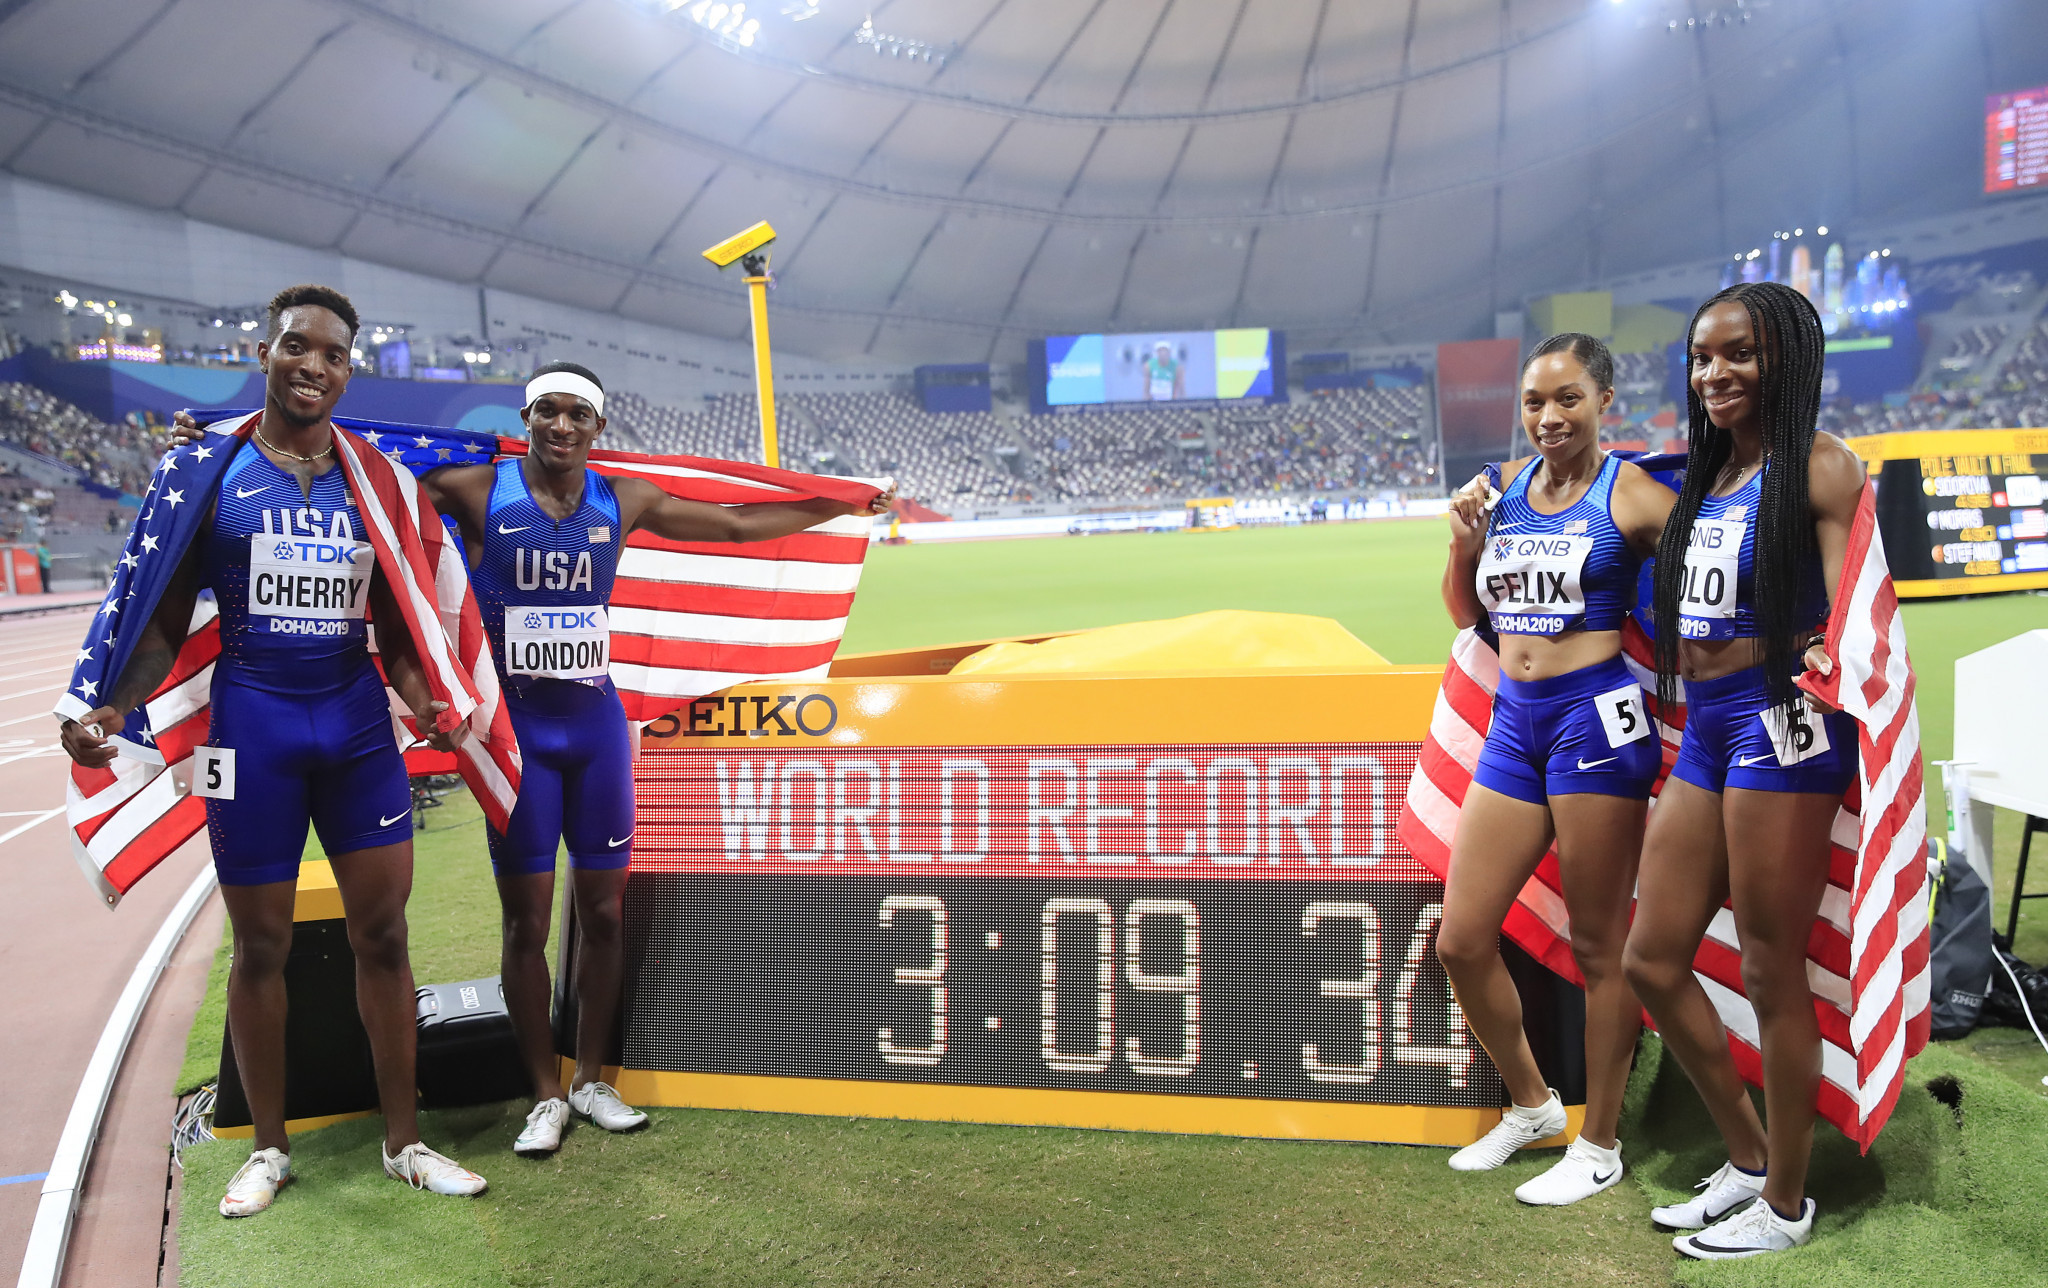 The United States broke the world record in the new mixed 4x400m relay for the second time in two days but with a different line-up to the one they used yesterday ©Getty Images